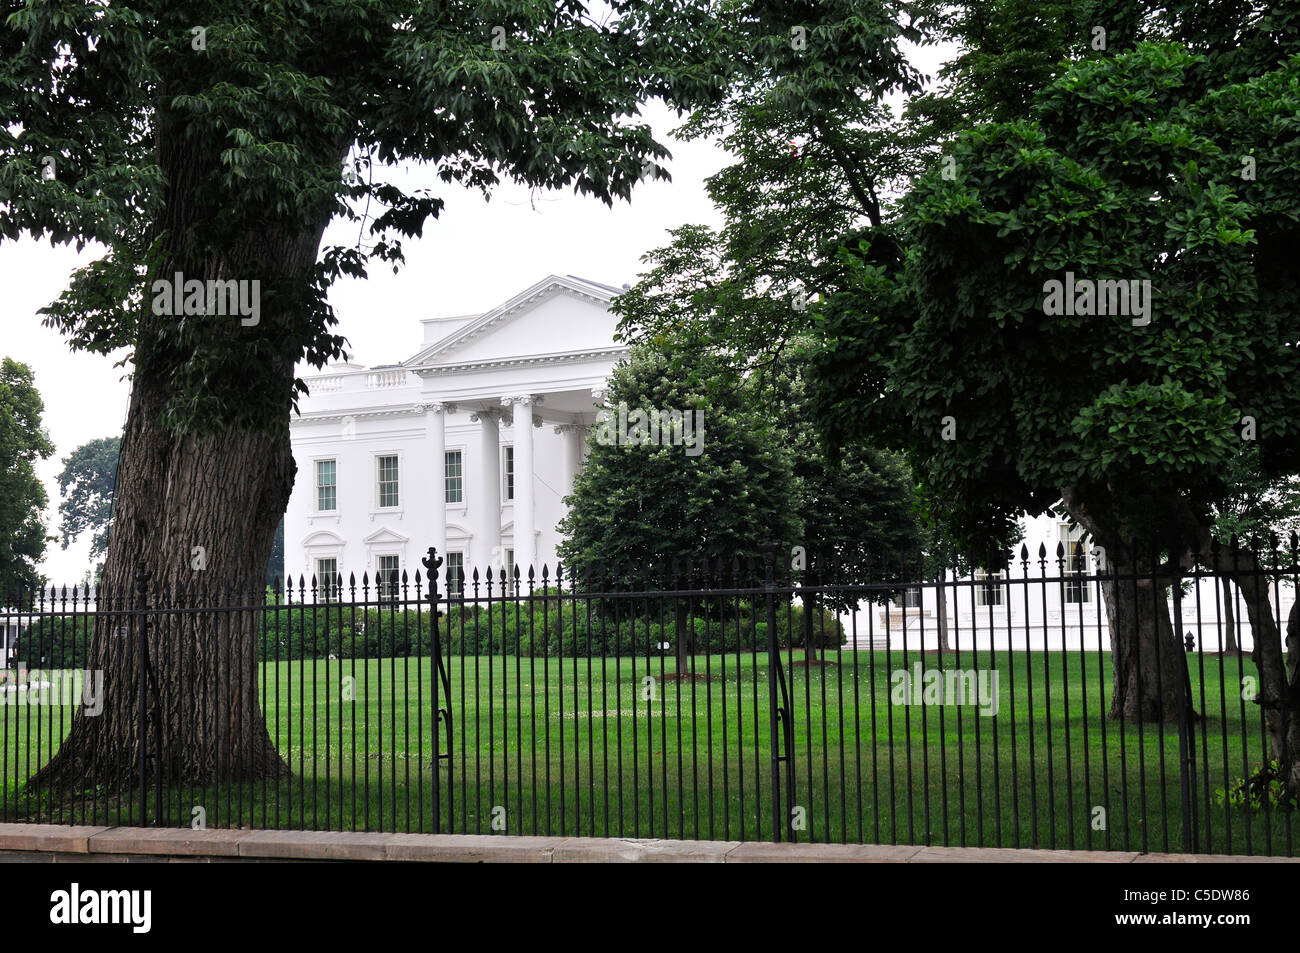 The White House is the official residence and principal workplace of the President of the United States. Stock Photo